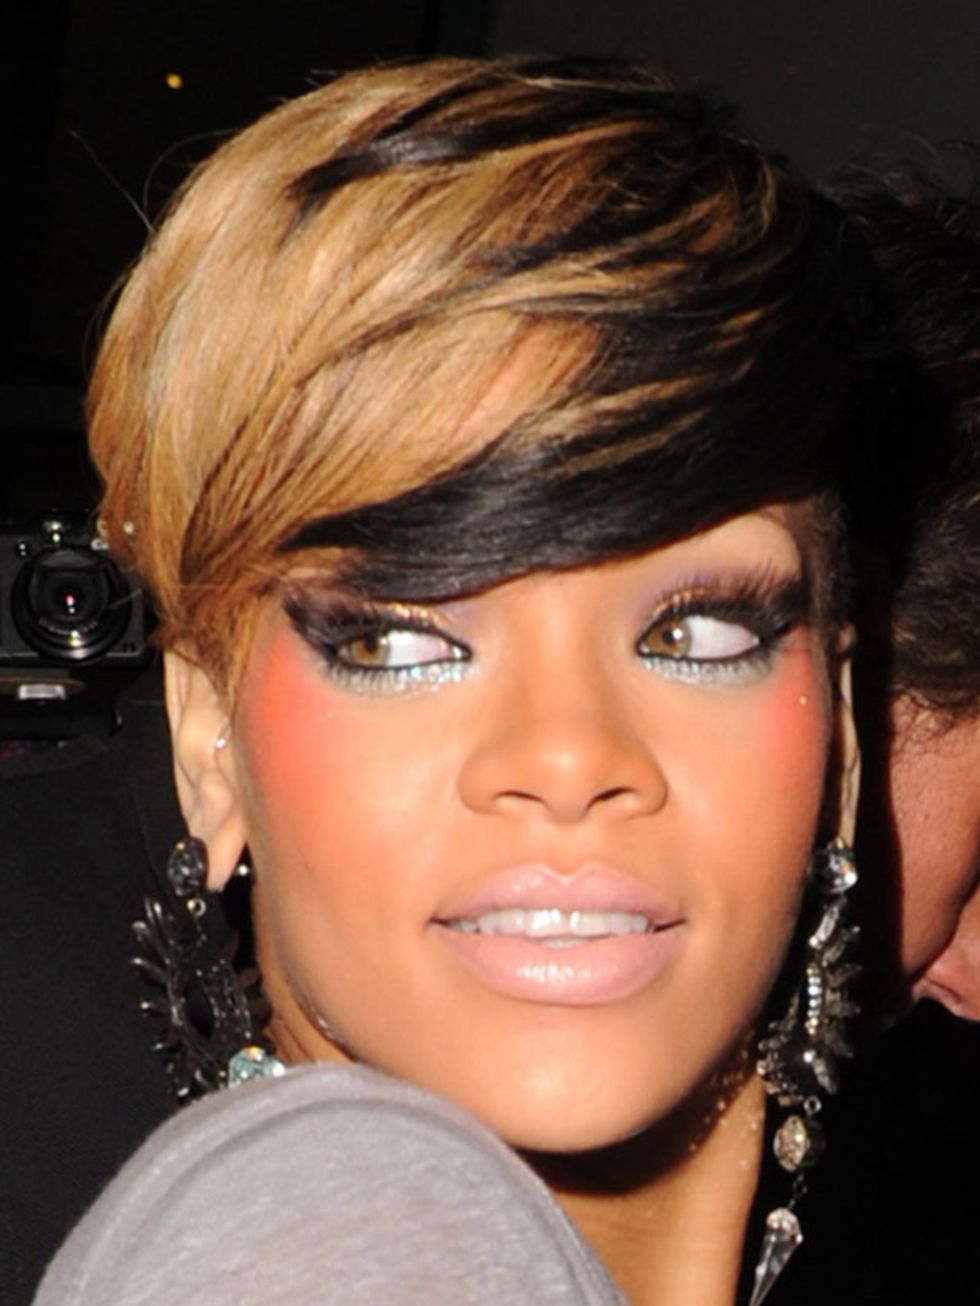 <p><a href="http://www.elleuk.com/beauty/hair/hair-features/%28section%29/celebrity-hair-secrets">Click here to read about Rihanna's ever-changing hairstyle...</a></p>